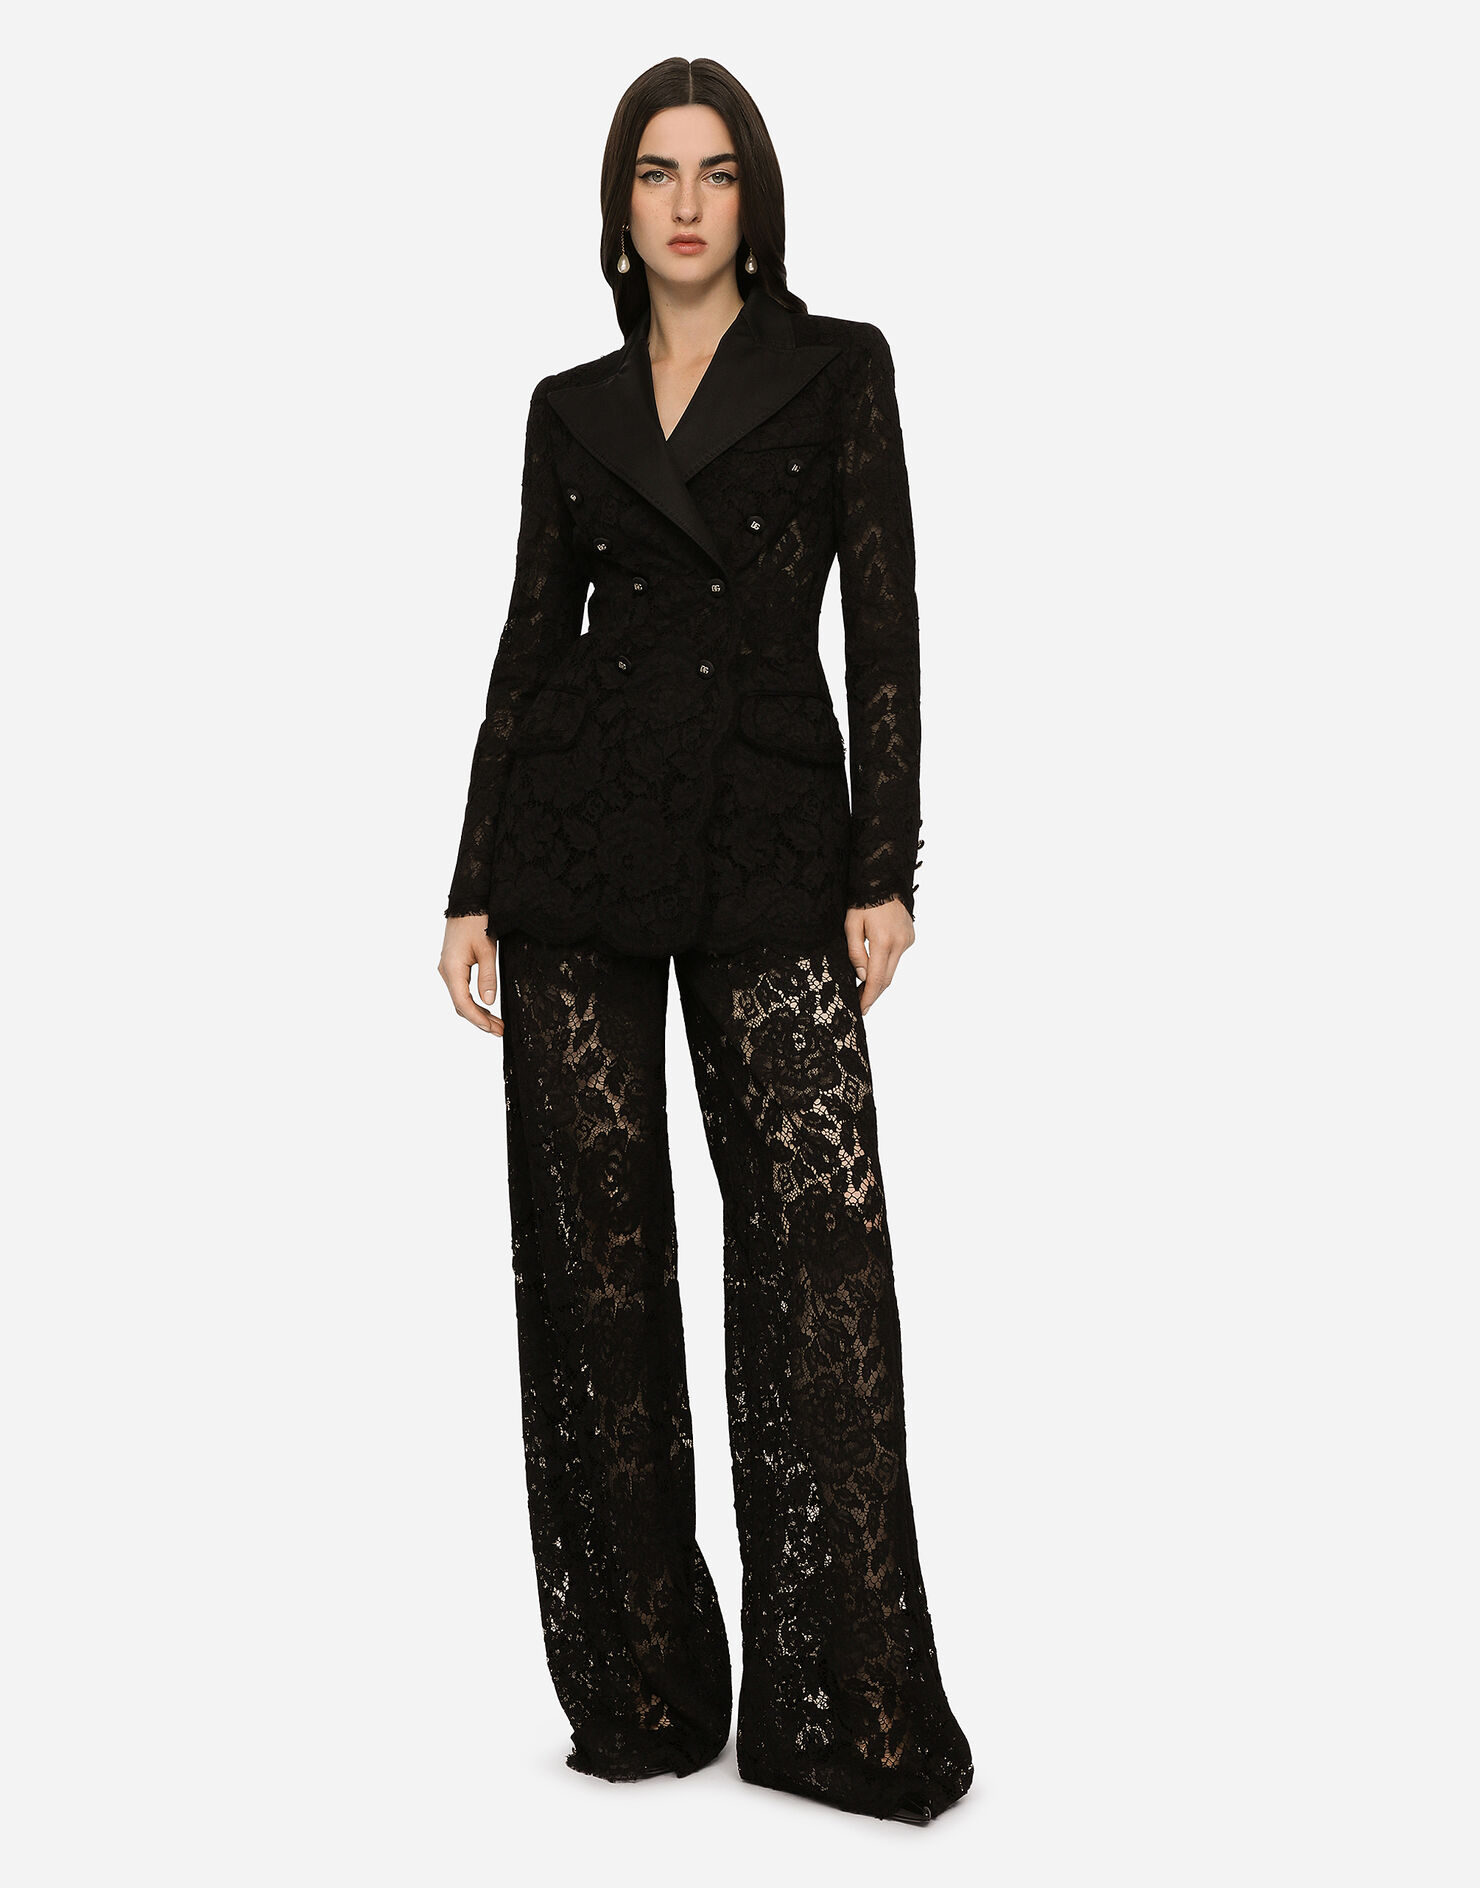 Flared branded stretch lace pants in Black for | Dolce&Gabbana® US